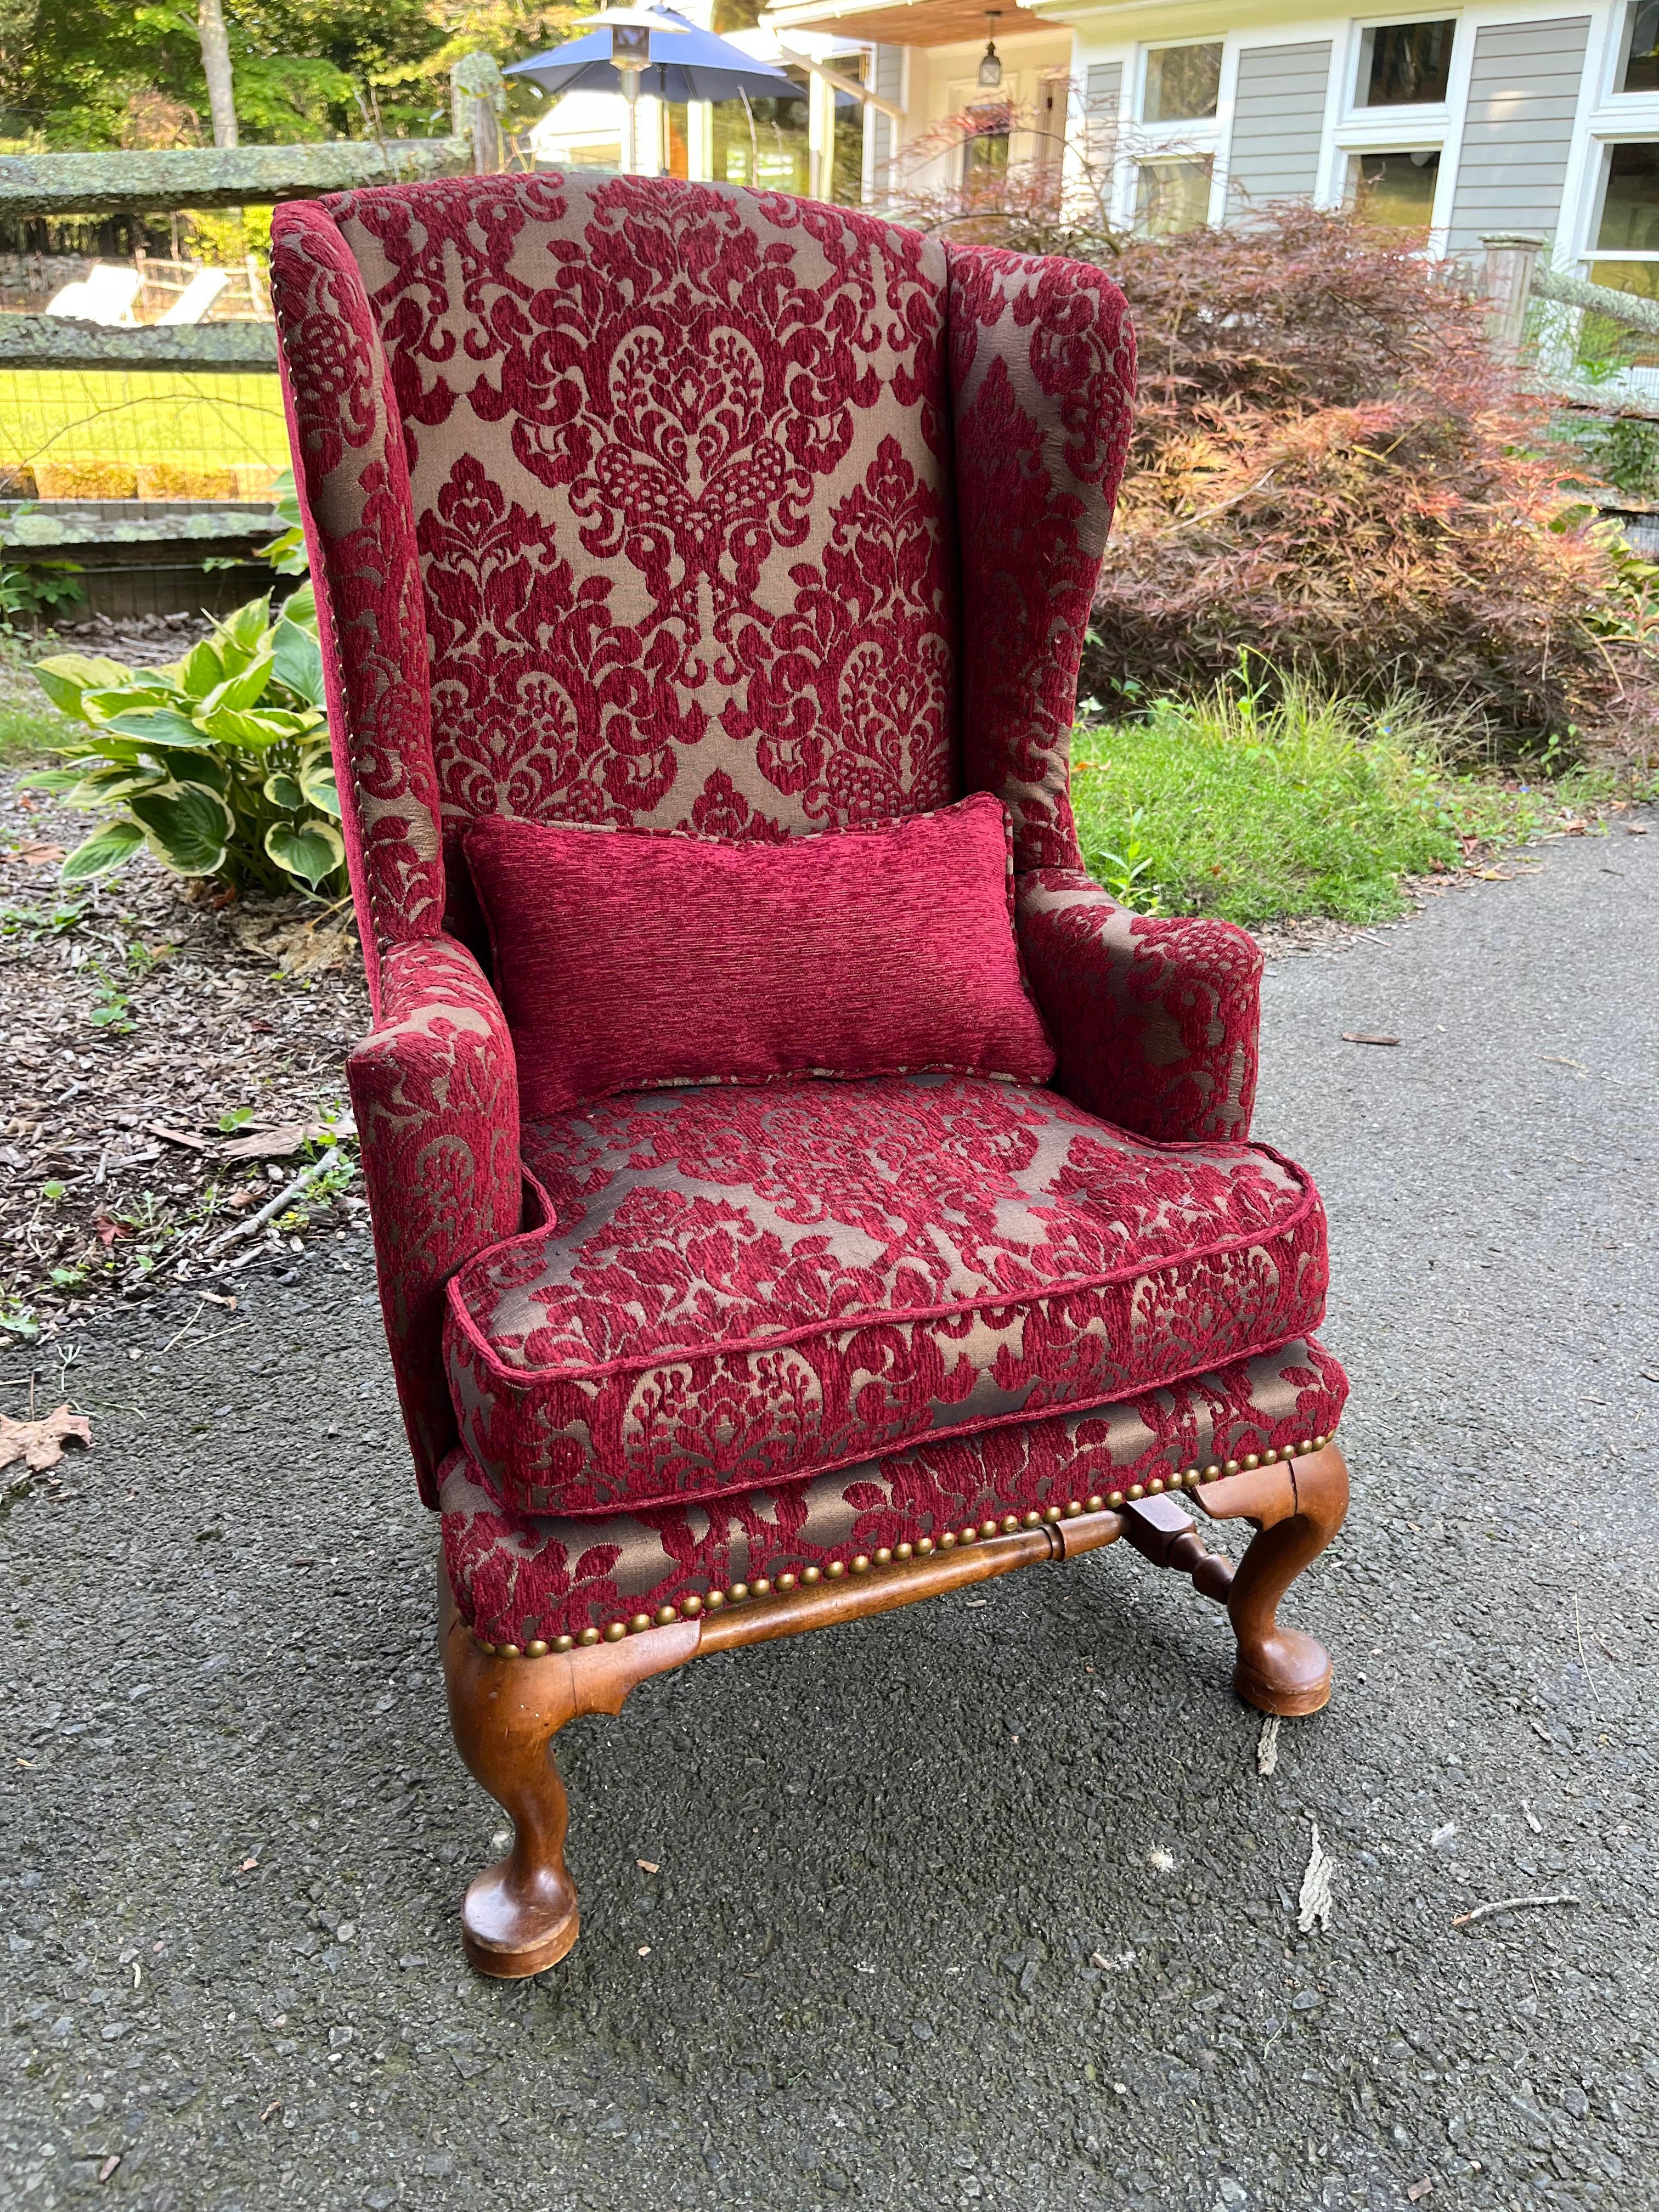 An adorable child’s size wing-back chair, nicely upholstered in burgundy wood brocade fabric with brass nailhead details and matching pillow. The perfect Christmas gift for a little prince or princess.